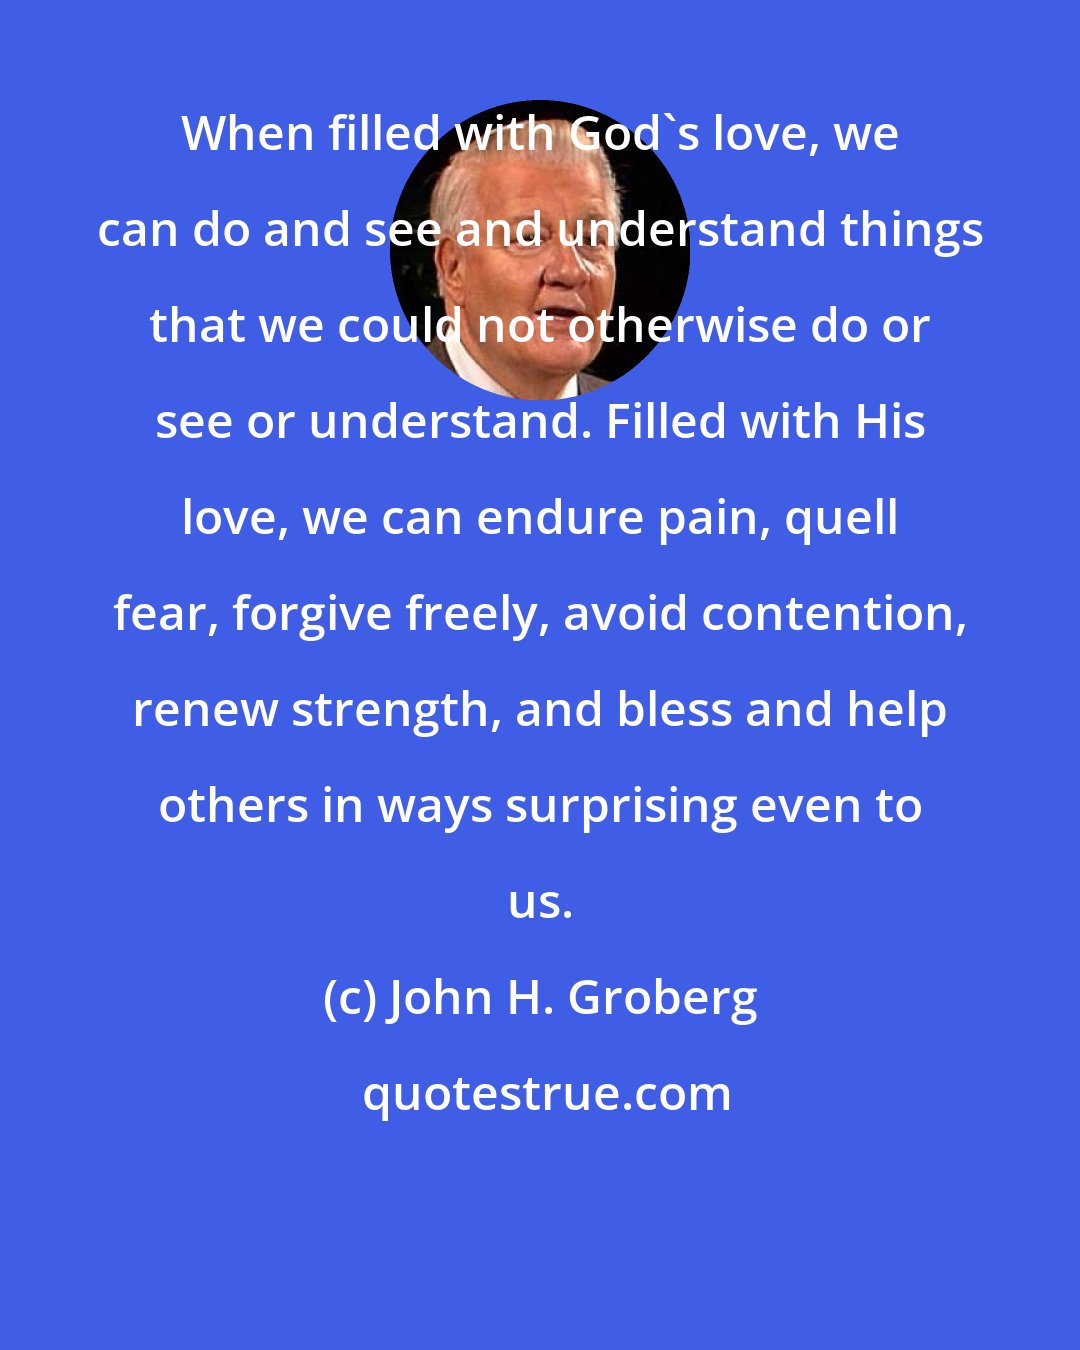 John H. Groberg: When filled with God's love, we can do and see and understand things that we could not otherwise do or see or understand. Filled with His love, we can endure pain, quell fear, forgive freely, avoid contention, renew strength, and bless and help others in ways surprising even to us.